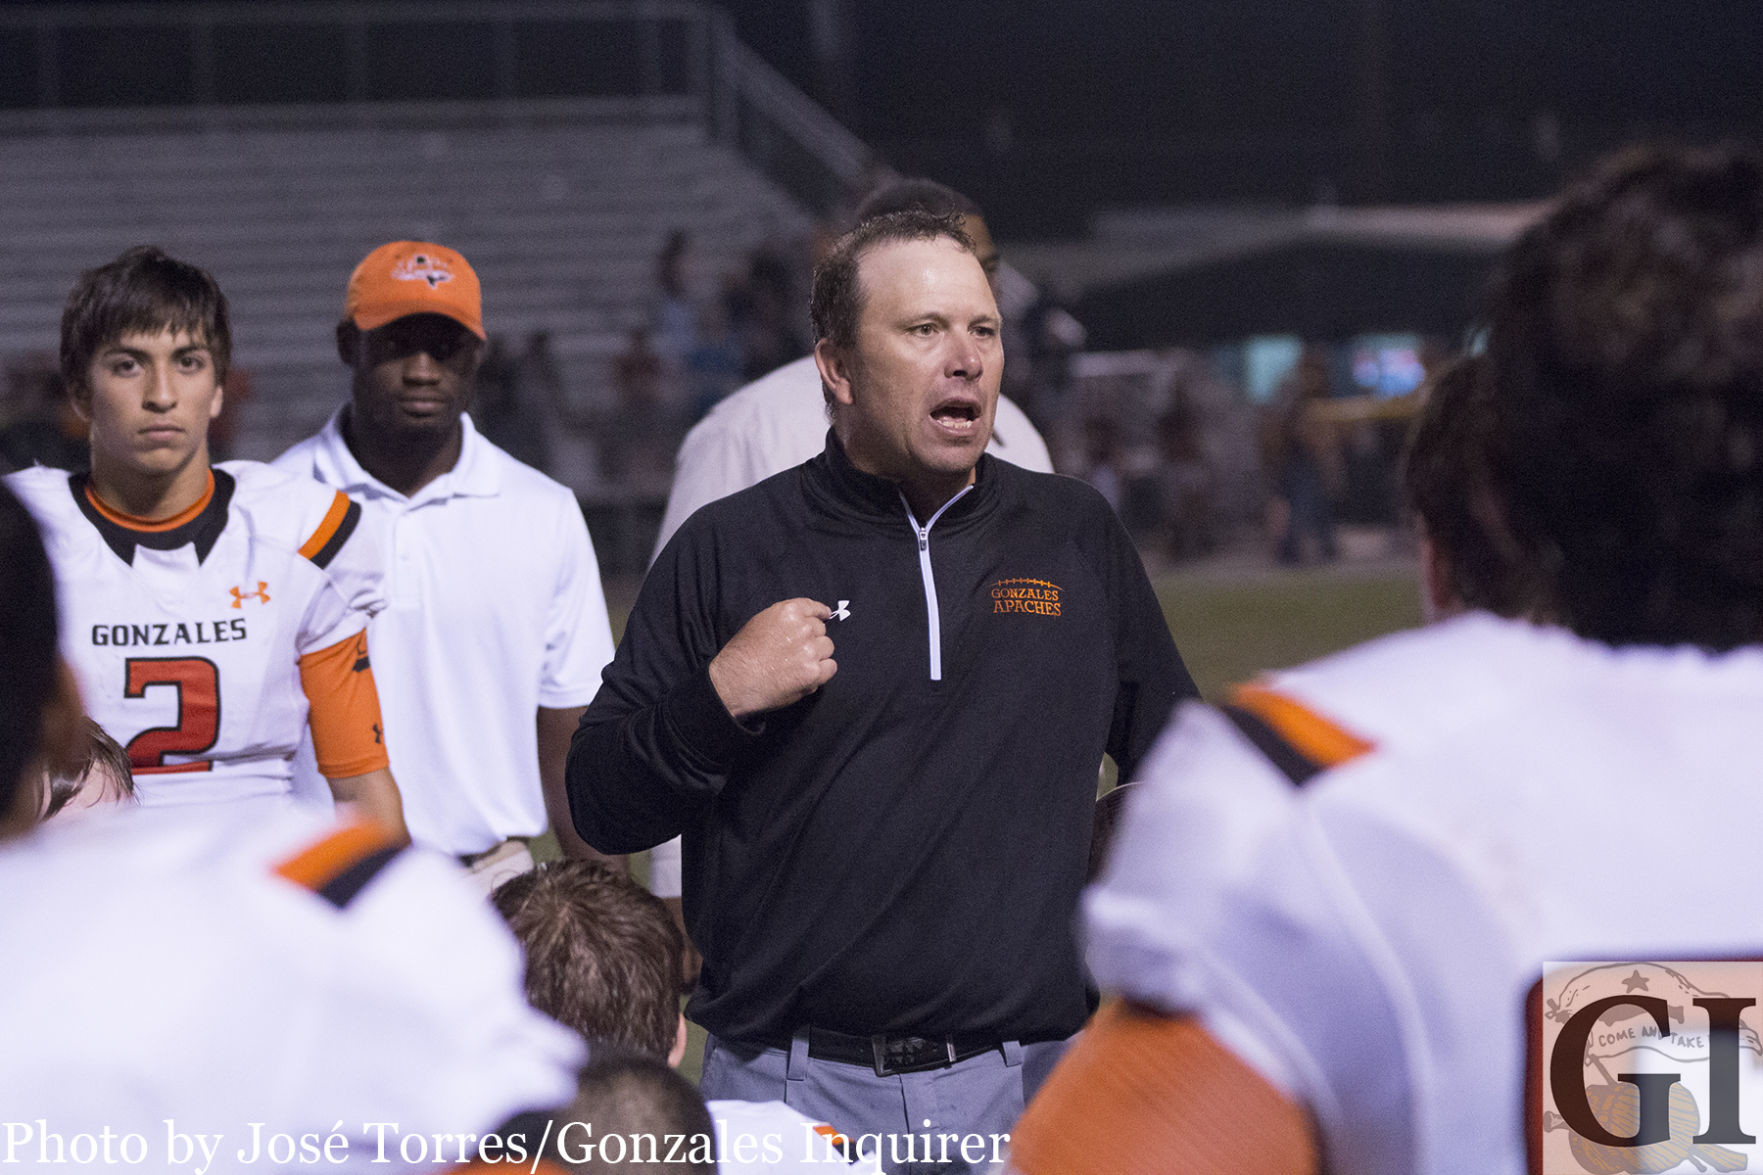 Head coach Kodi Crane believes the key to getting a win Friday night relies with his offensive line and defensive front. After the Apaches’ tough season, he hopes his squad is ready for the challenge.